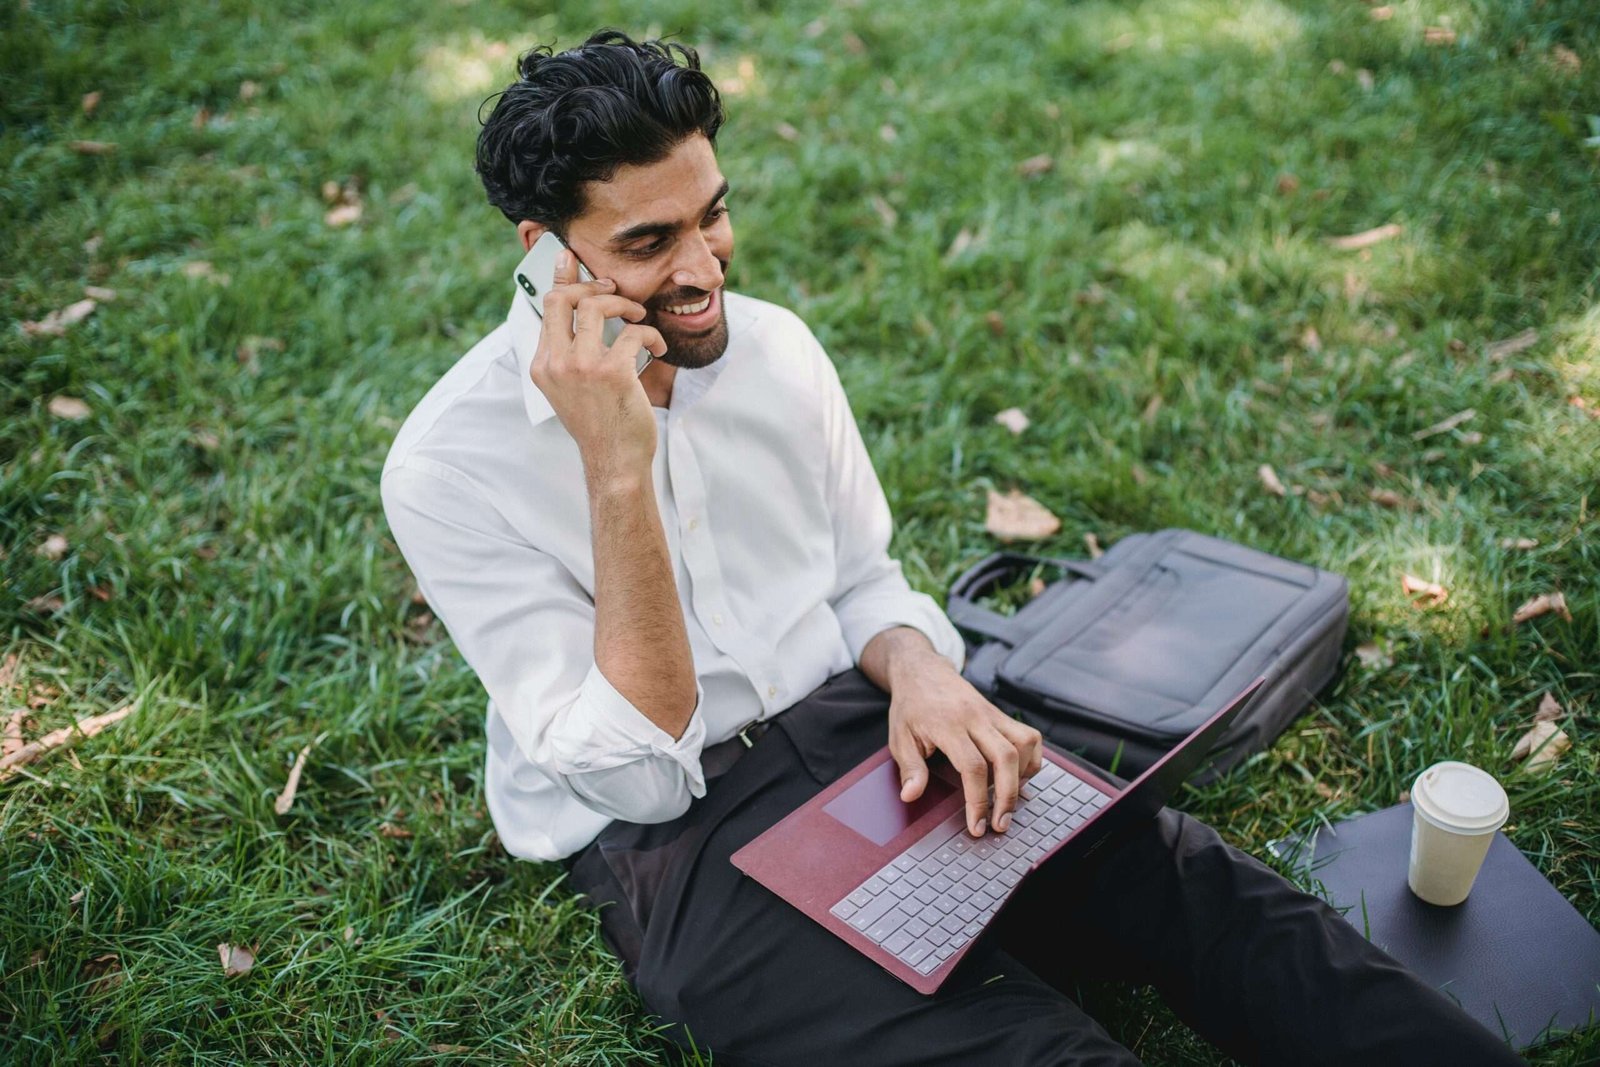 Photo by Ketut Subiyanto: https://www.pexels.com/photo/a-businessman-sitting-on-grass-while-having-a-phone-call-4962986/